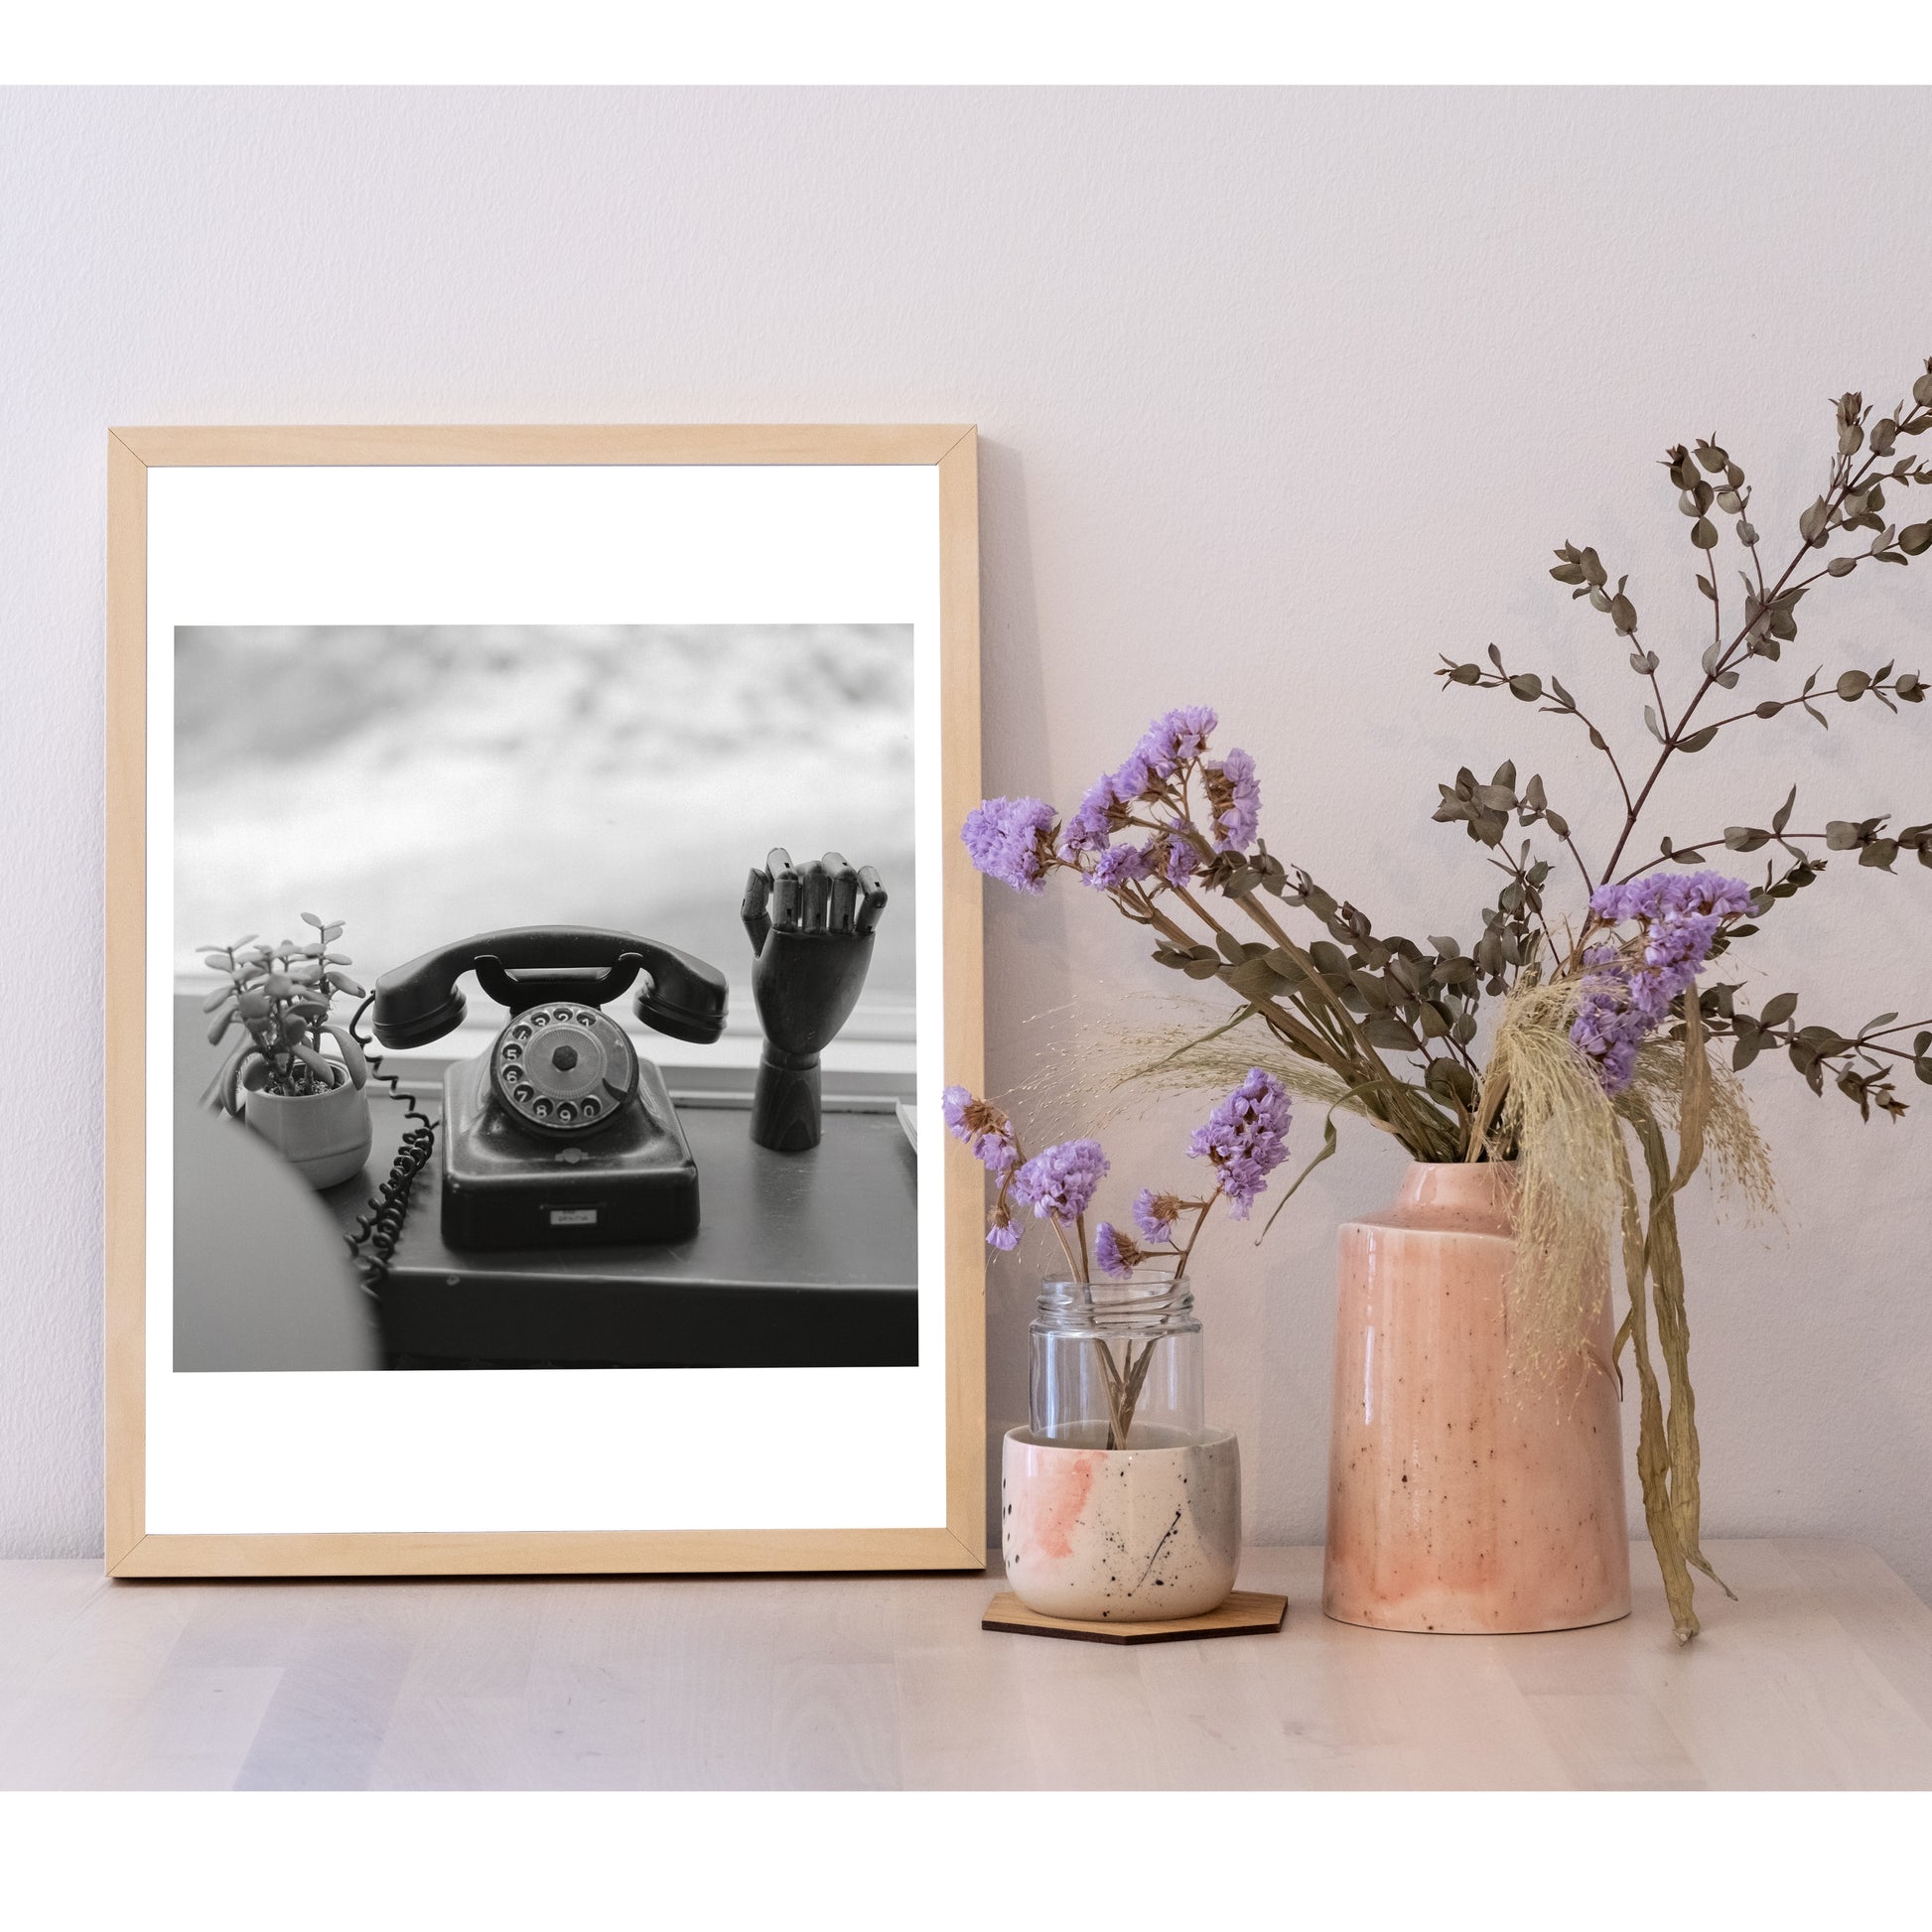 Detail of the 30x40 size photo in a frame, next to a ceramic pot with flowers. It is larger than the pot, and equal height to the flowers.